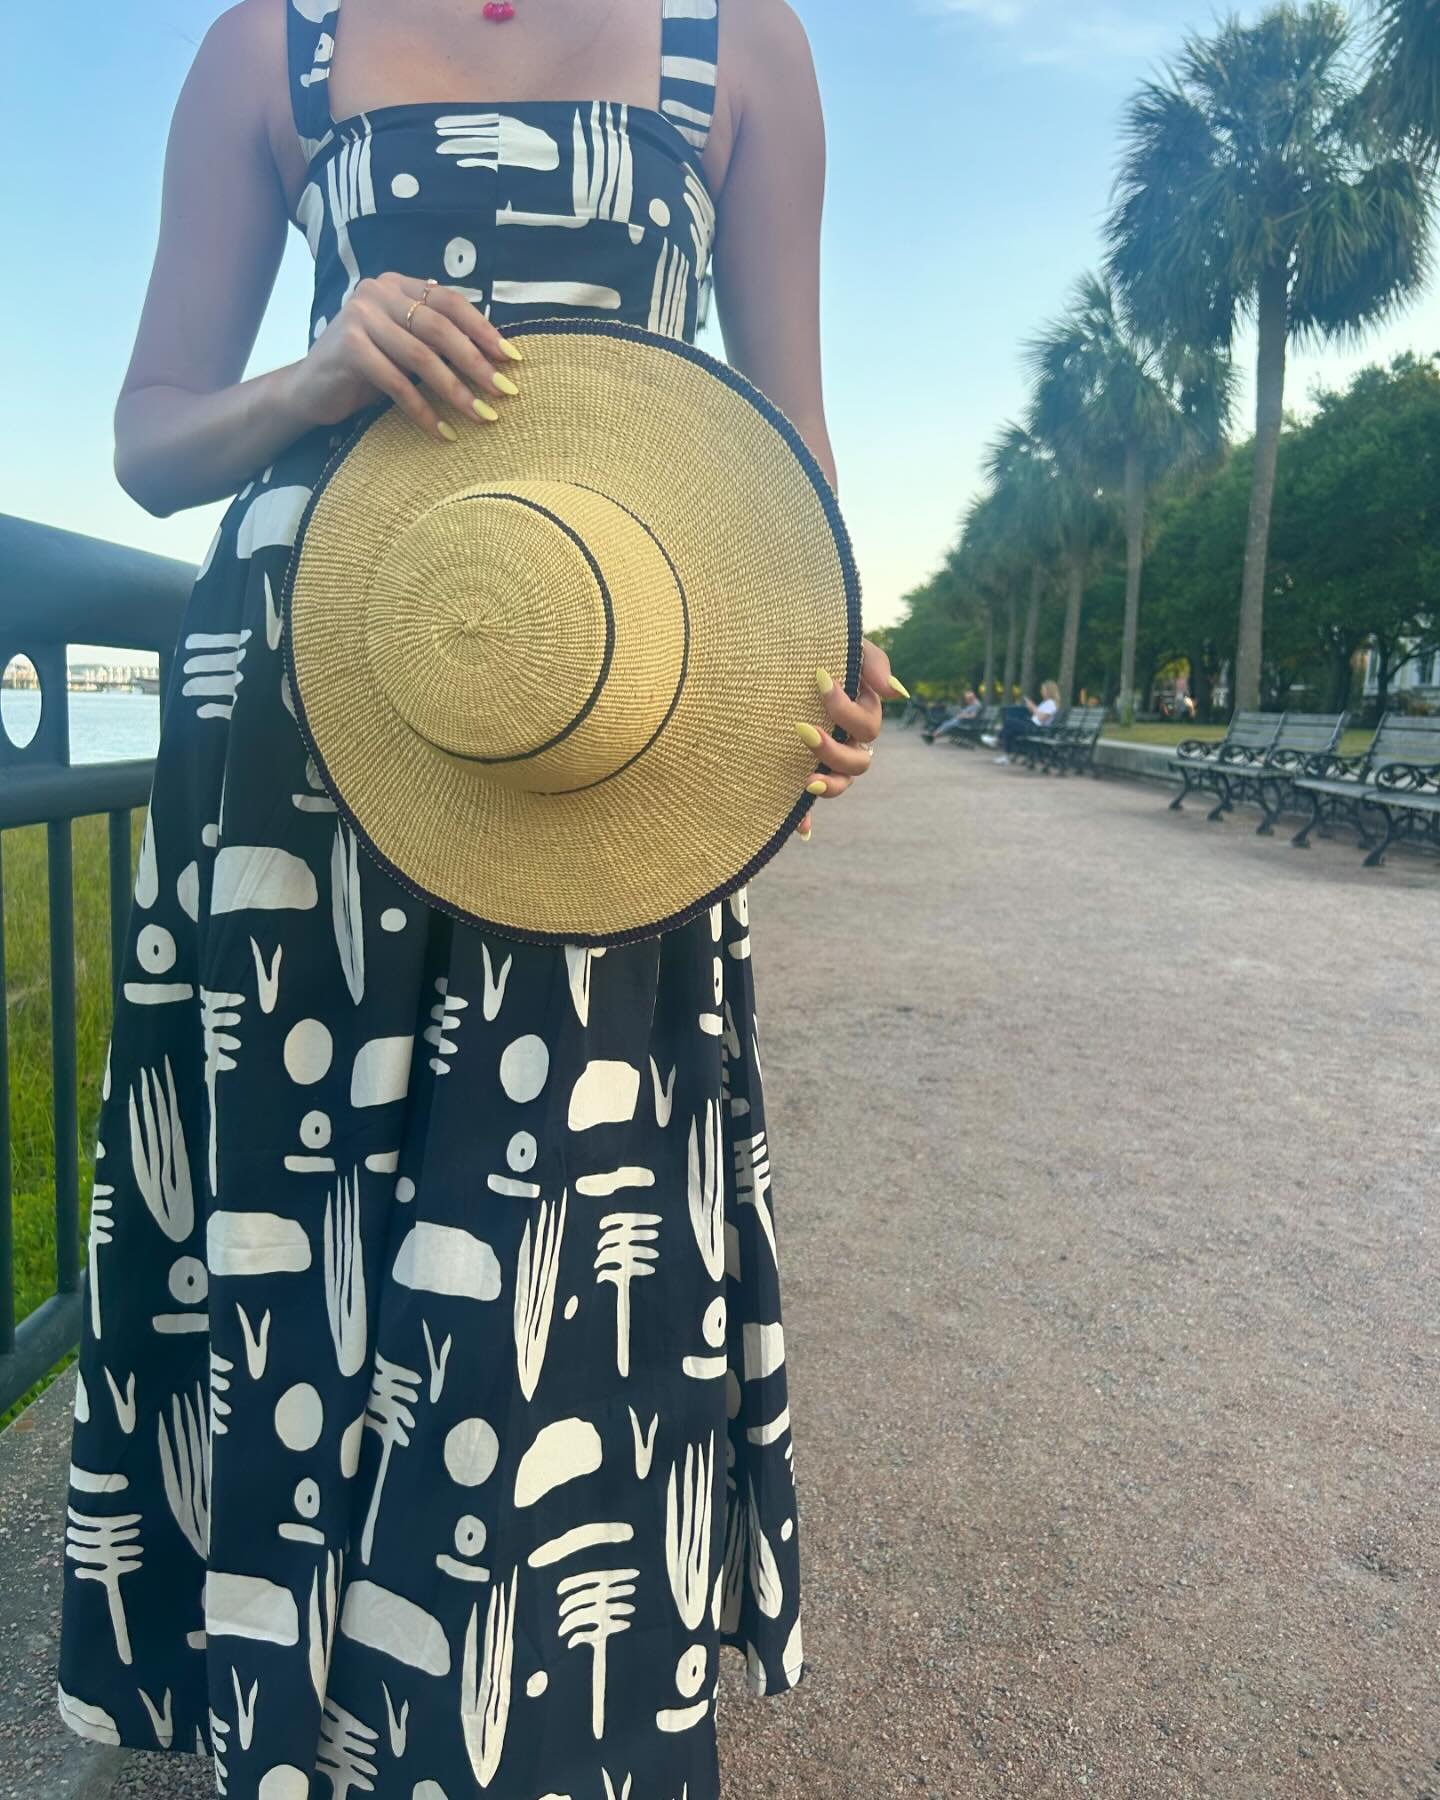 Waterfront stroll in Indigo style!!! Dress, rings, necklace, and hat all available in the store right now!!! Modeled by the beautiful @fionaelambrix 

#charlestonsc #pineapplefountain #cofc #charlestonsmallbusiness #smallbusiness #womenownedbusiness 